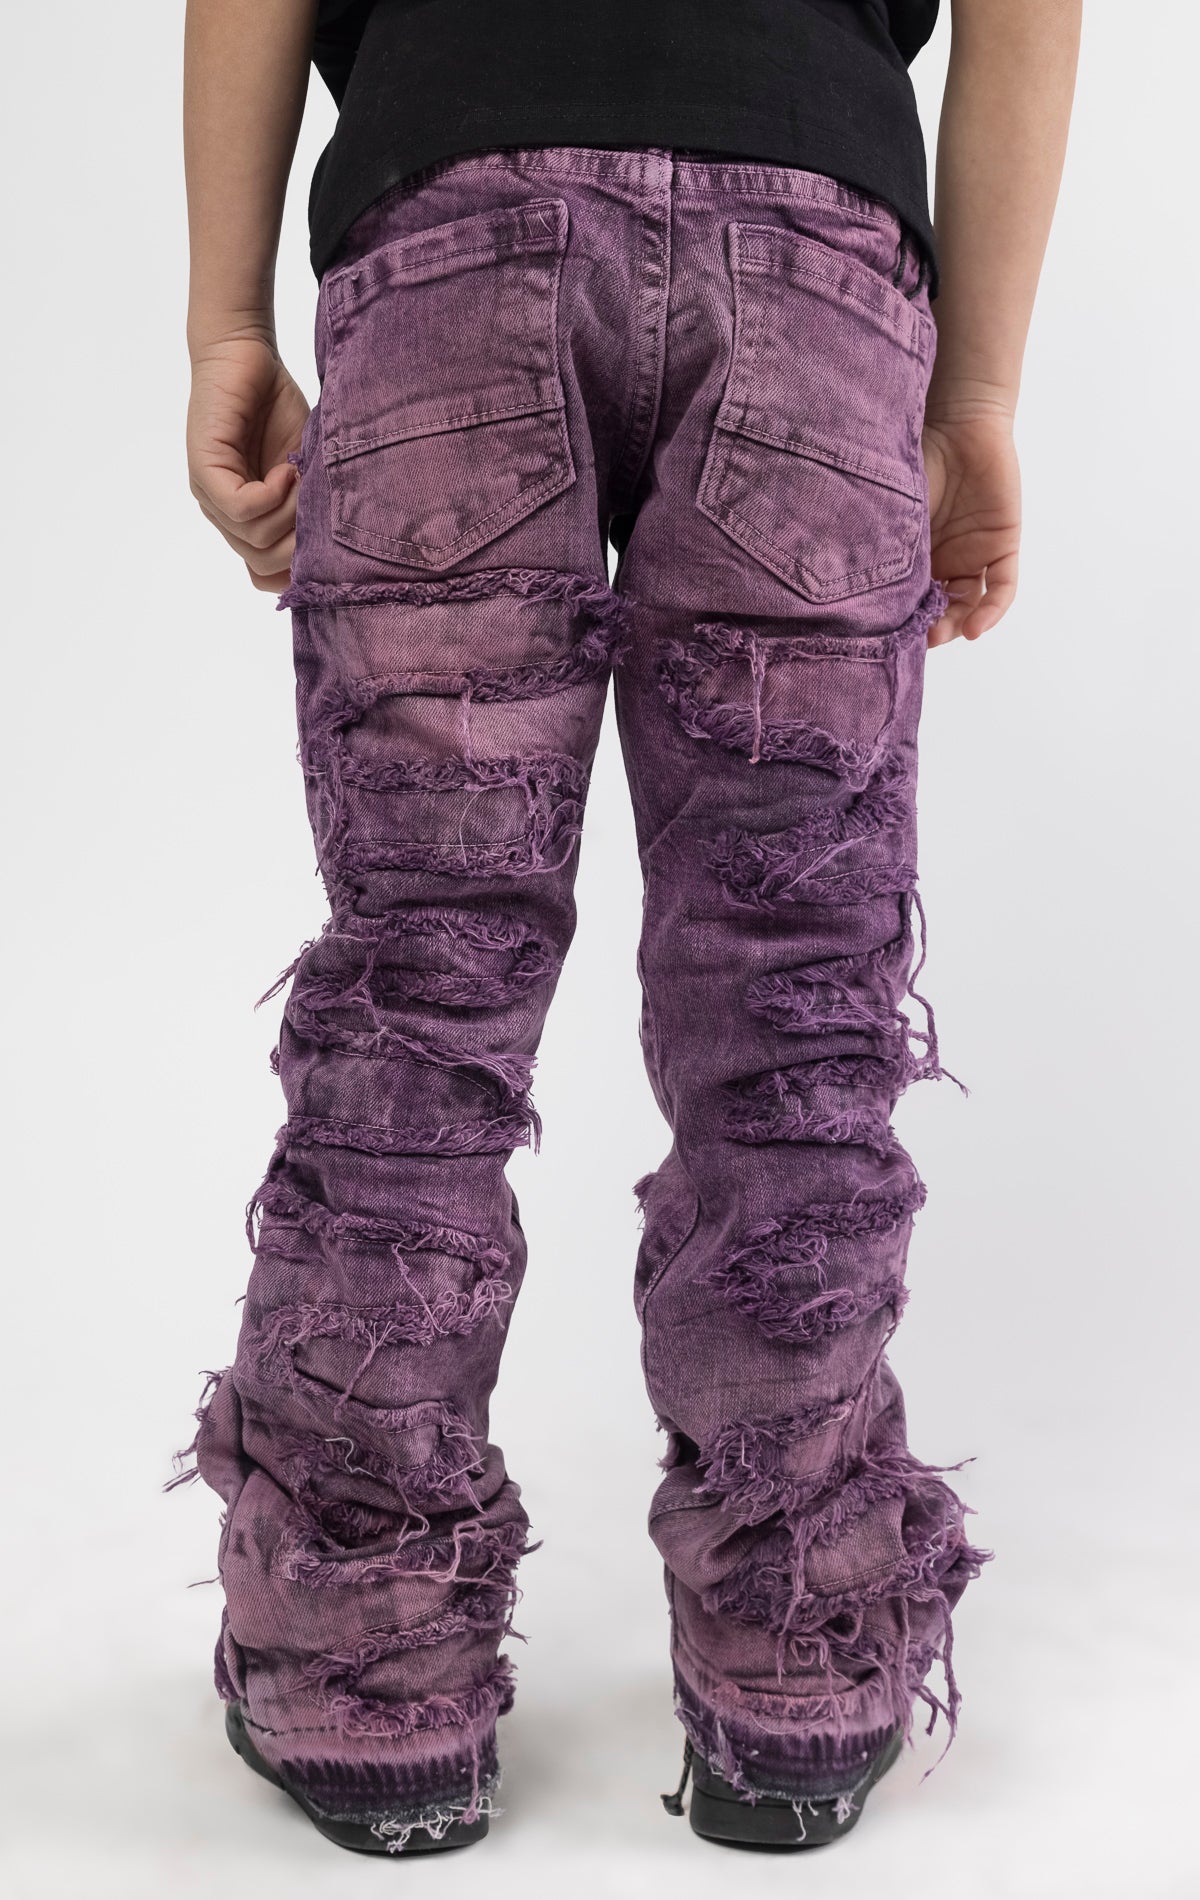 Skinny fit Regular rise denim with extended length for maximum stacks. Blush ombre wash with rip and repair design featuring self fabric backing. Patches and abrasions throughout for a trendy and edgy look.